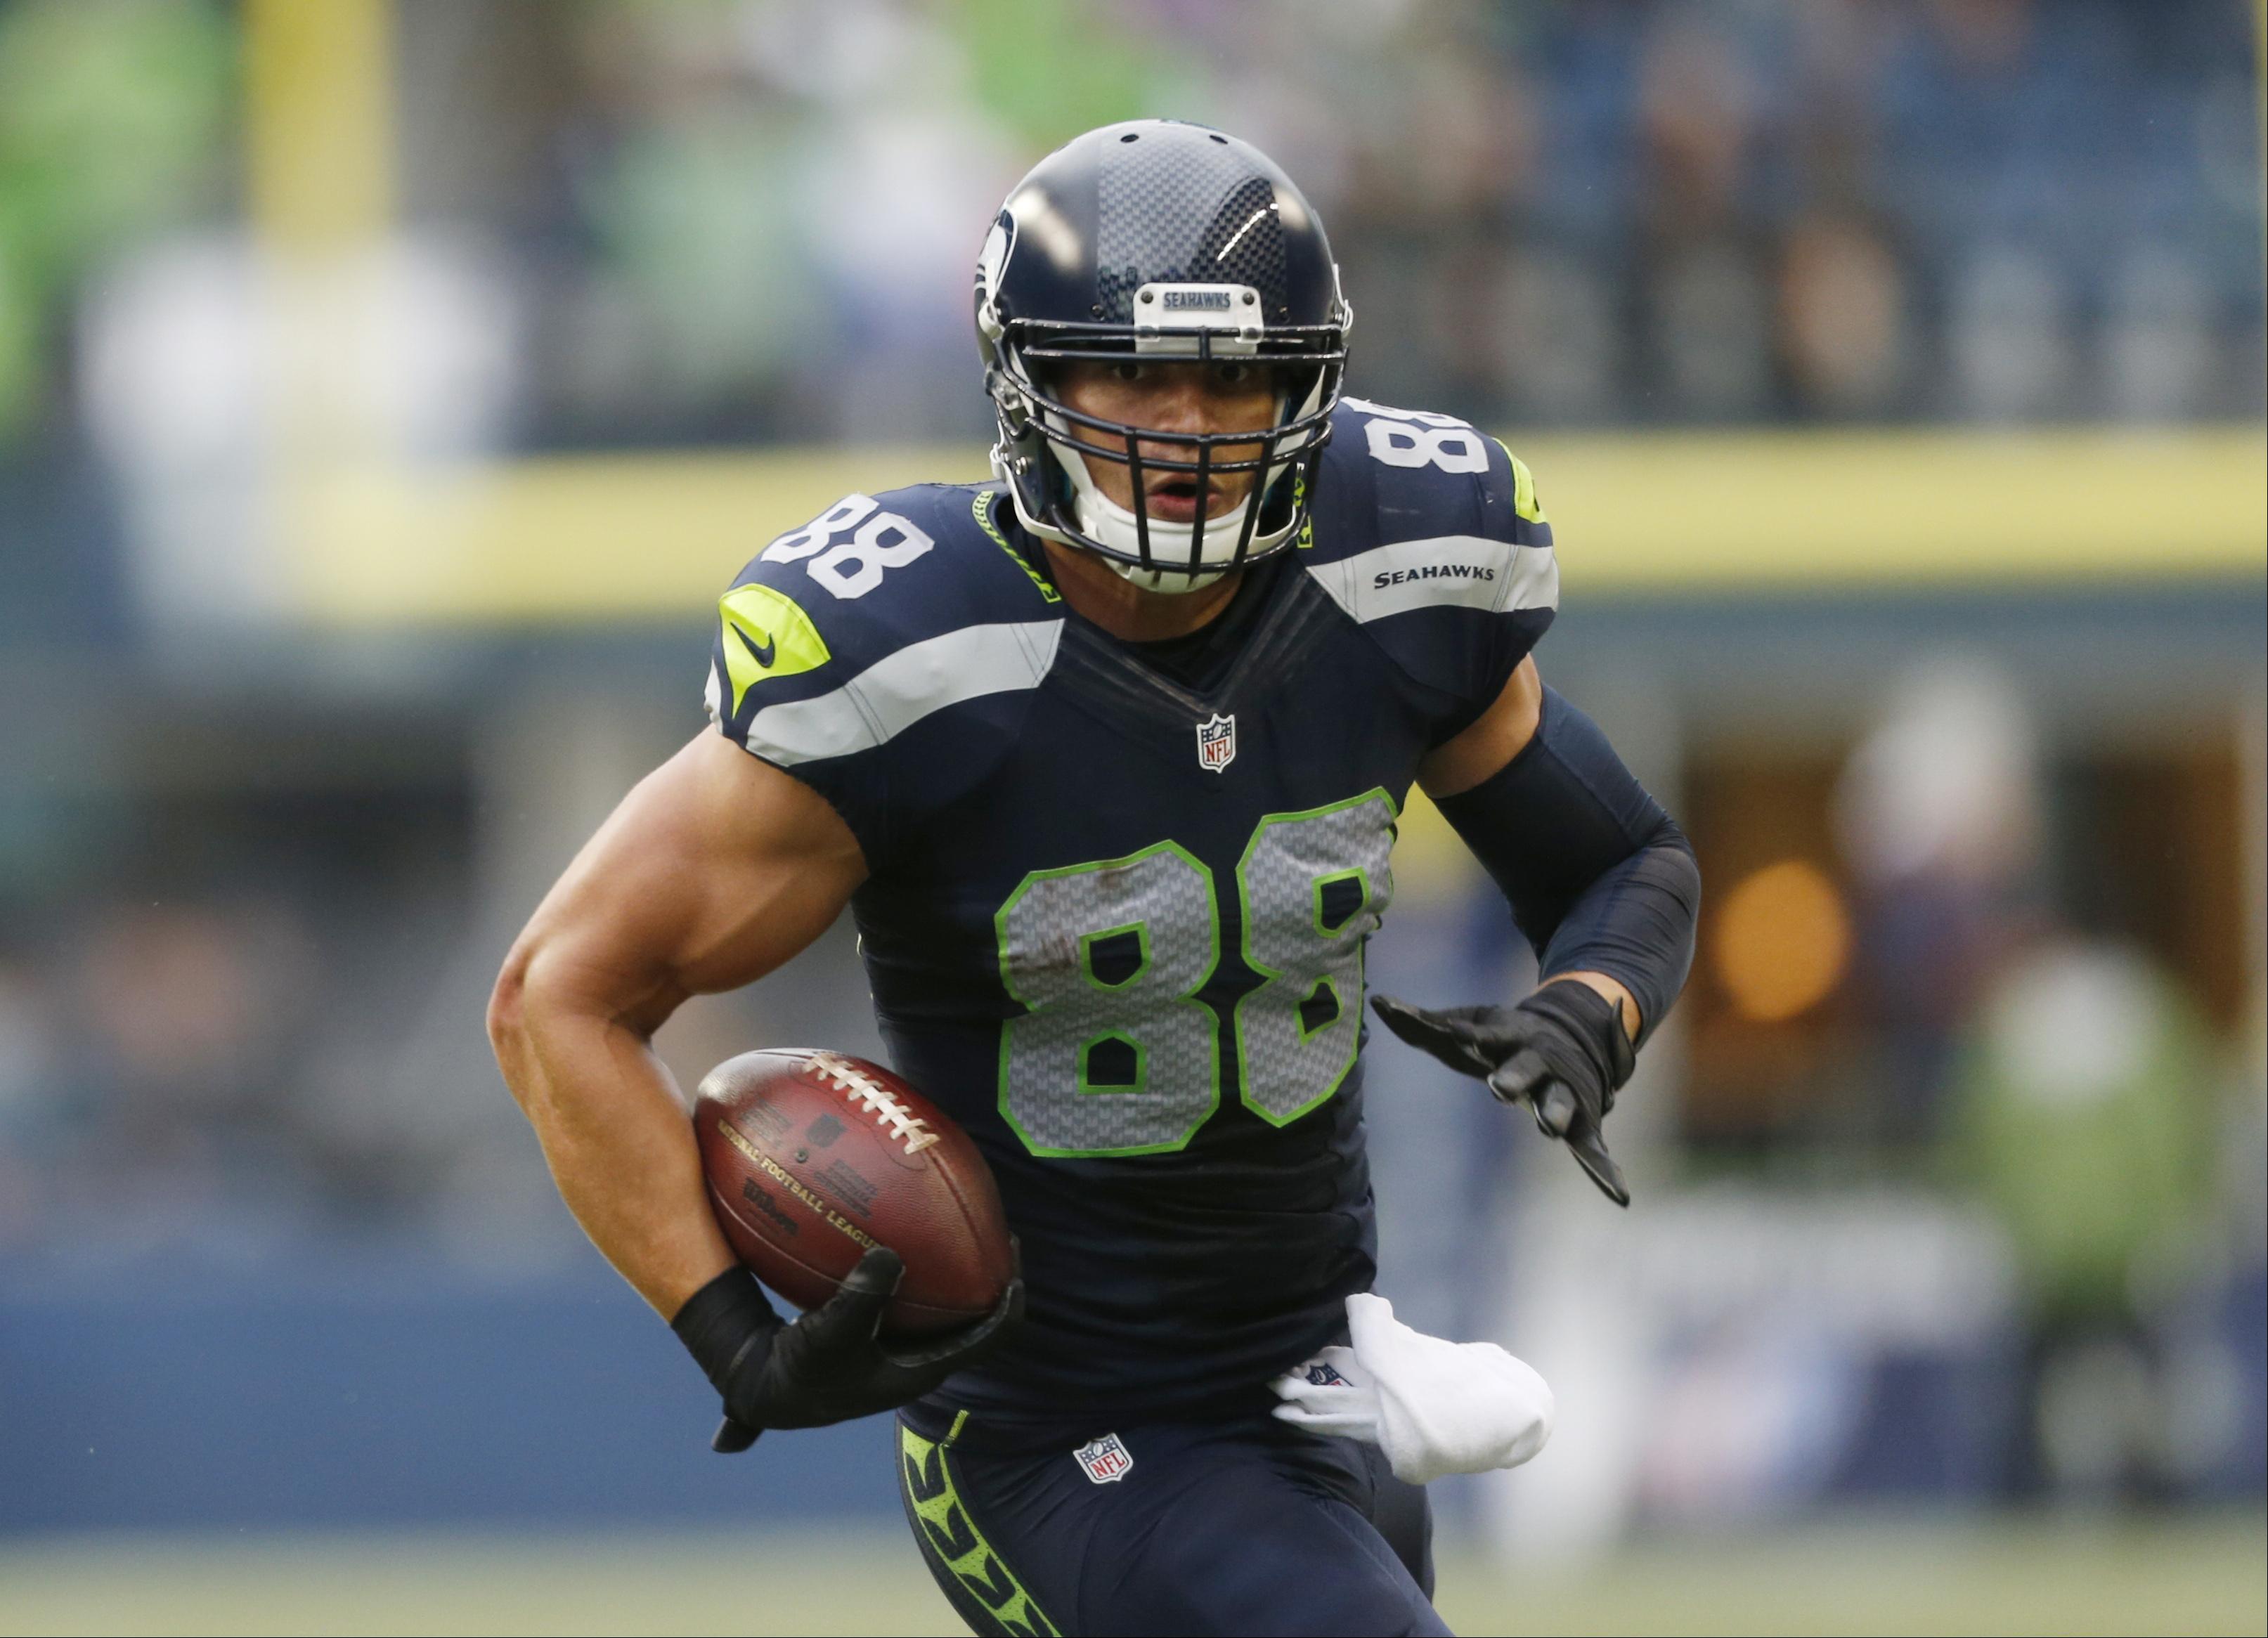 Seahawks tight end Jimmy Graham builds strength on basketball court